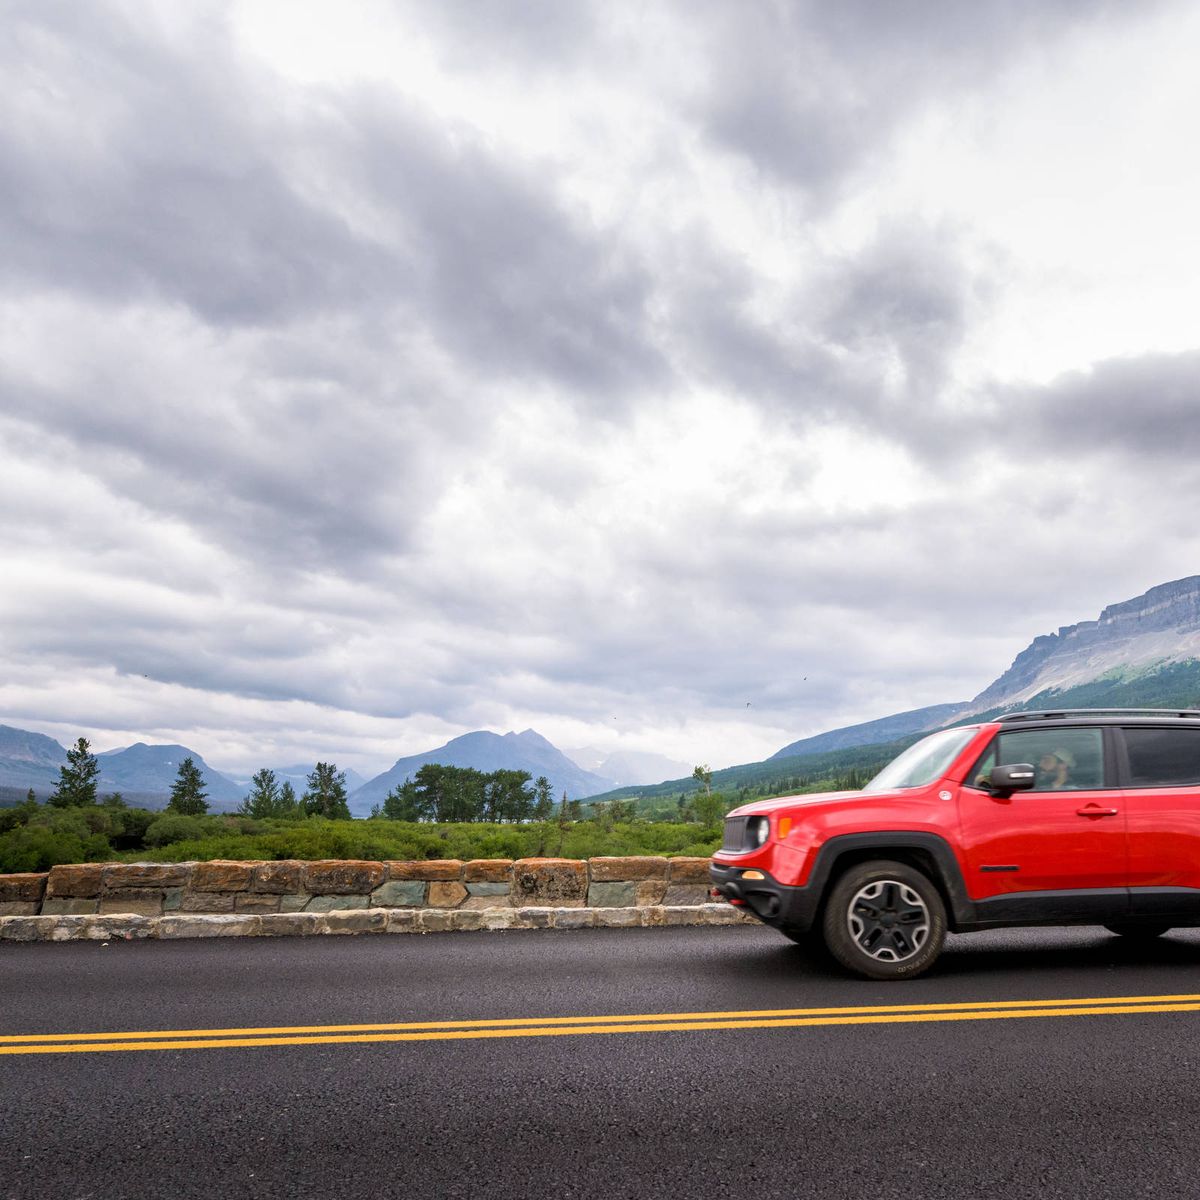 2015 Jeep Renegade Trailhawk drive review: School's in session